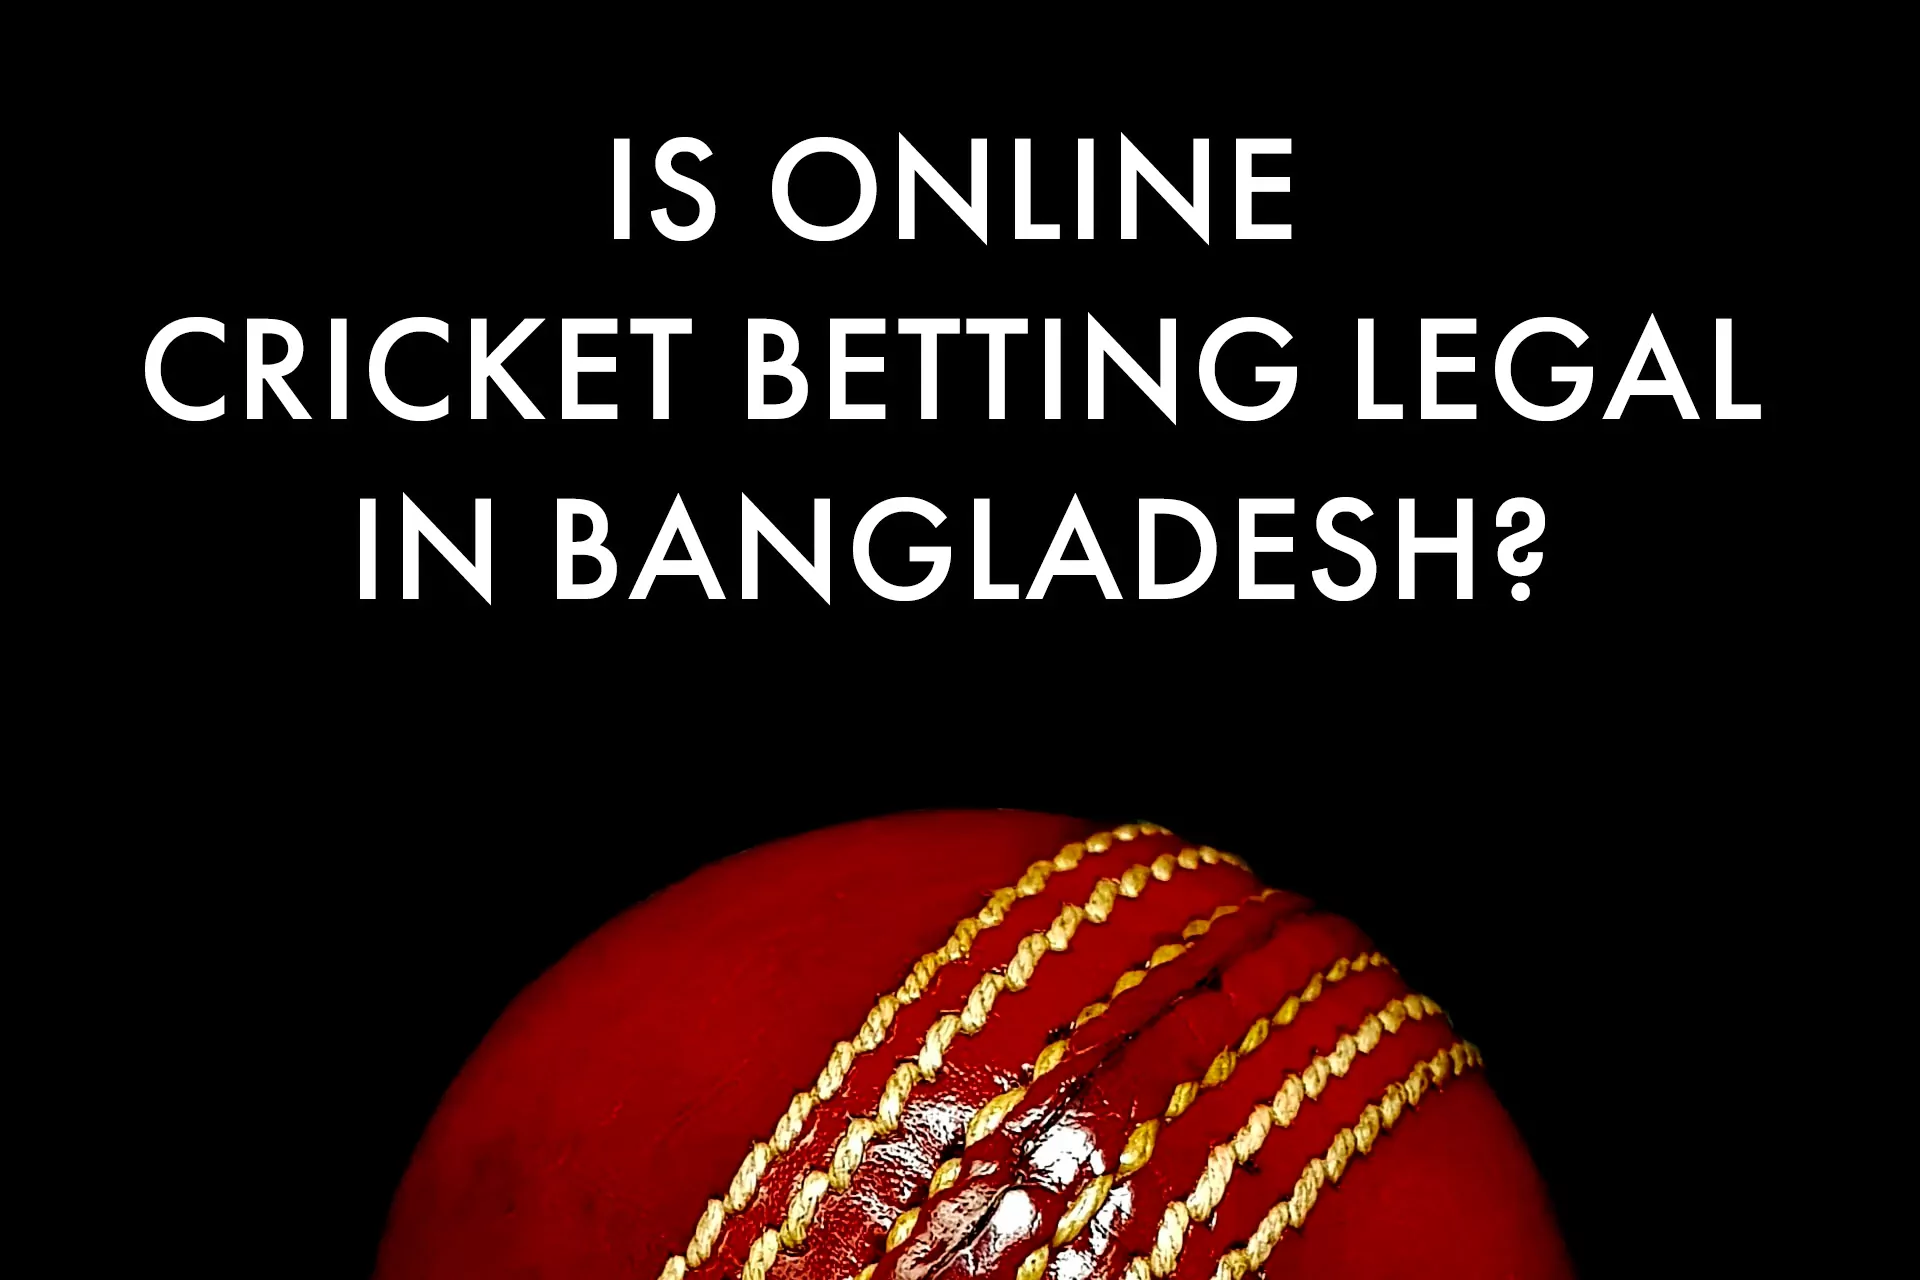 Is online cricket betting legal in Bangladesh?